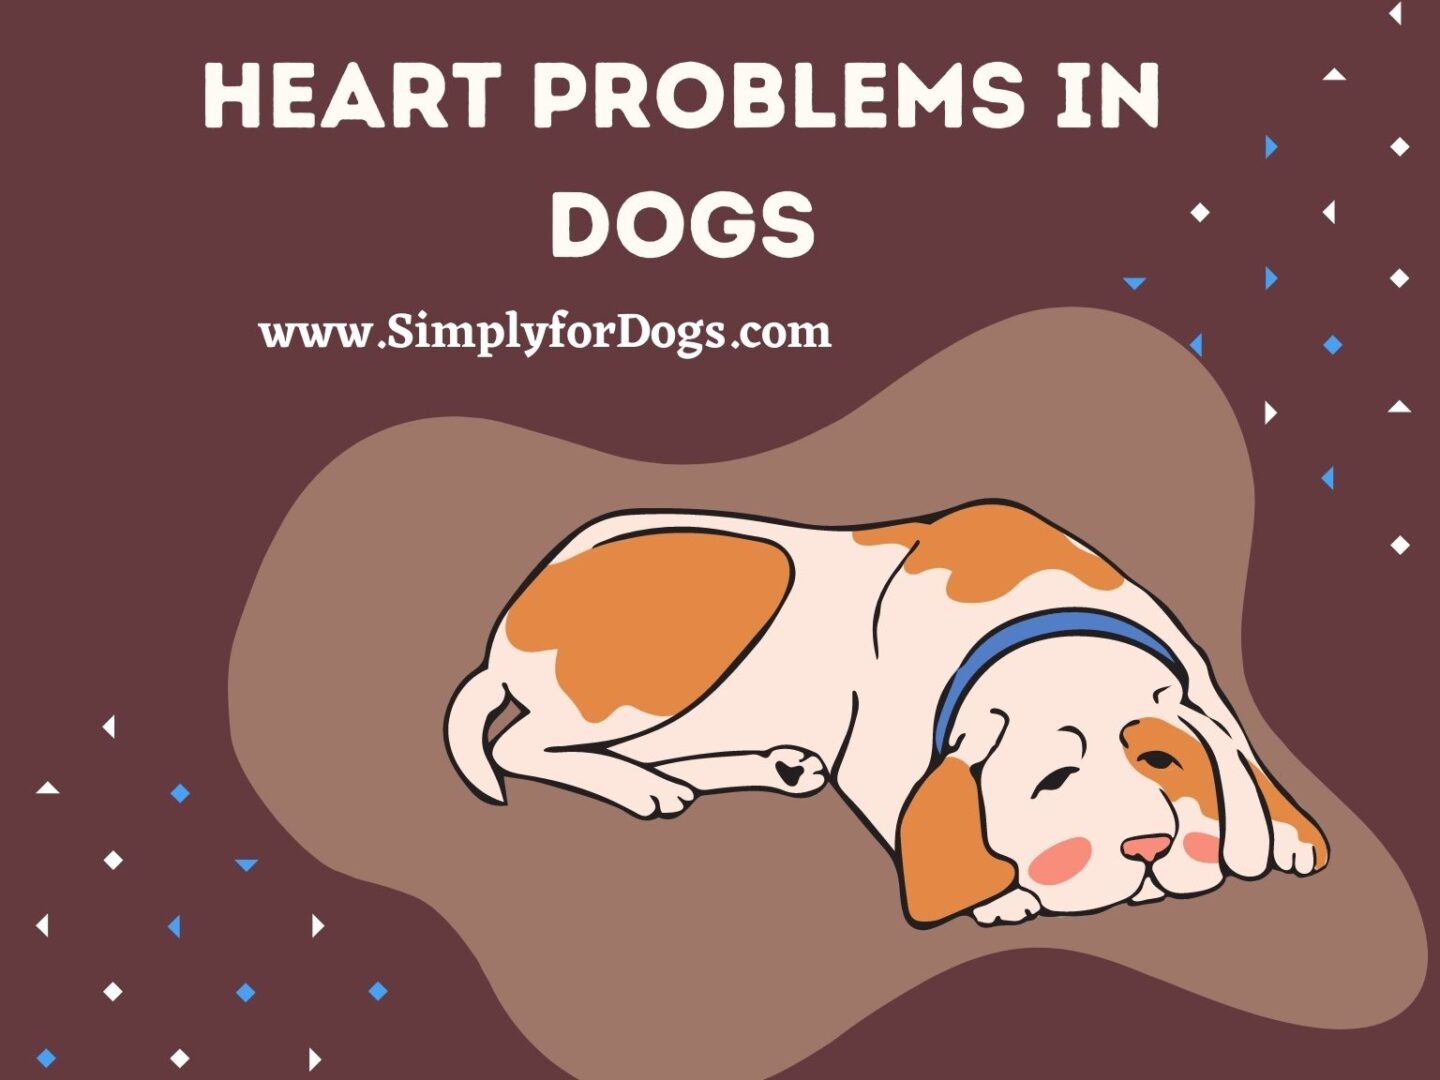 Heart Problems in Dogs